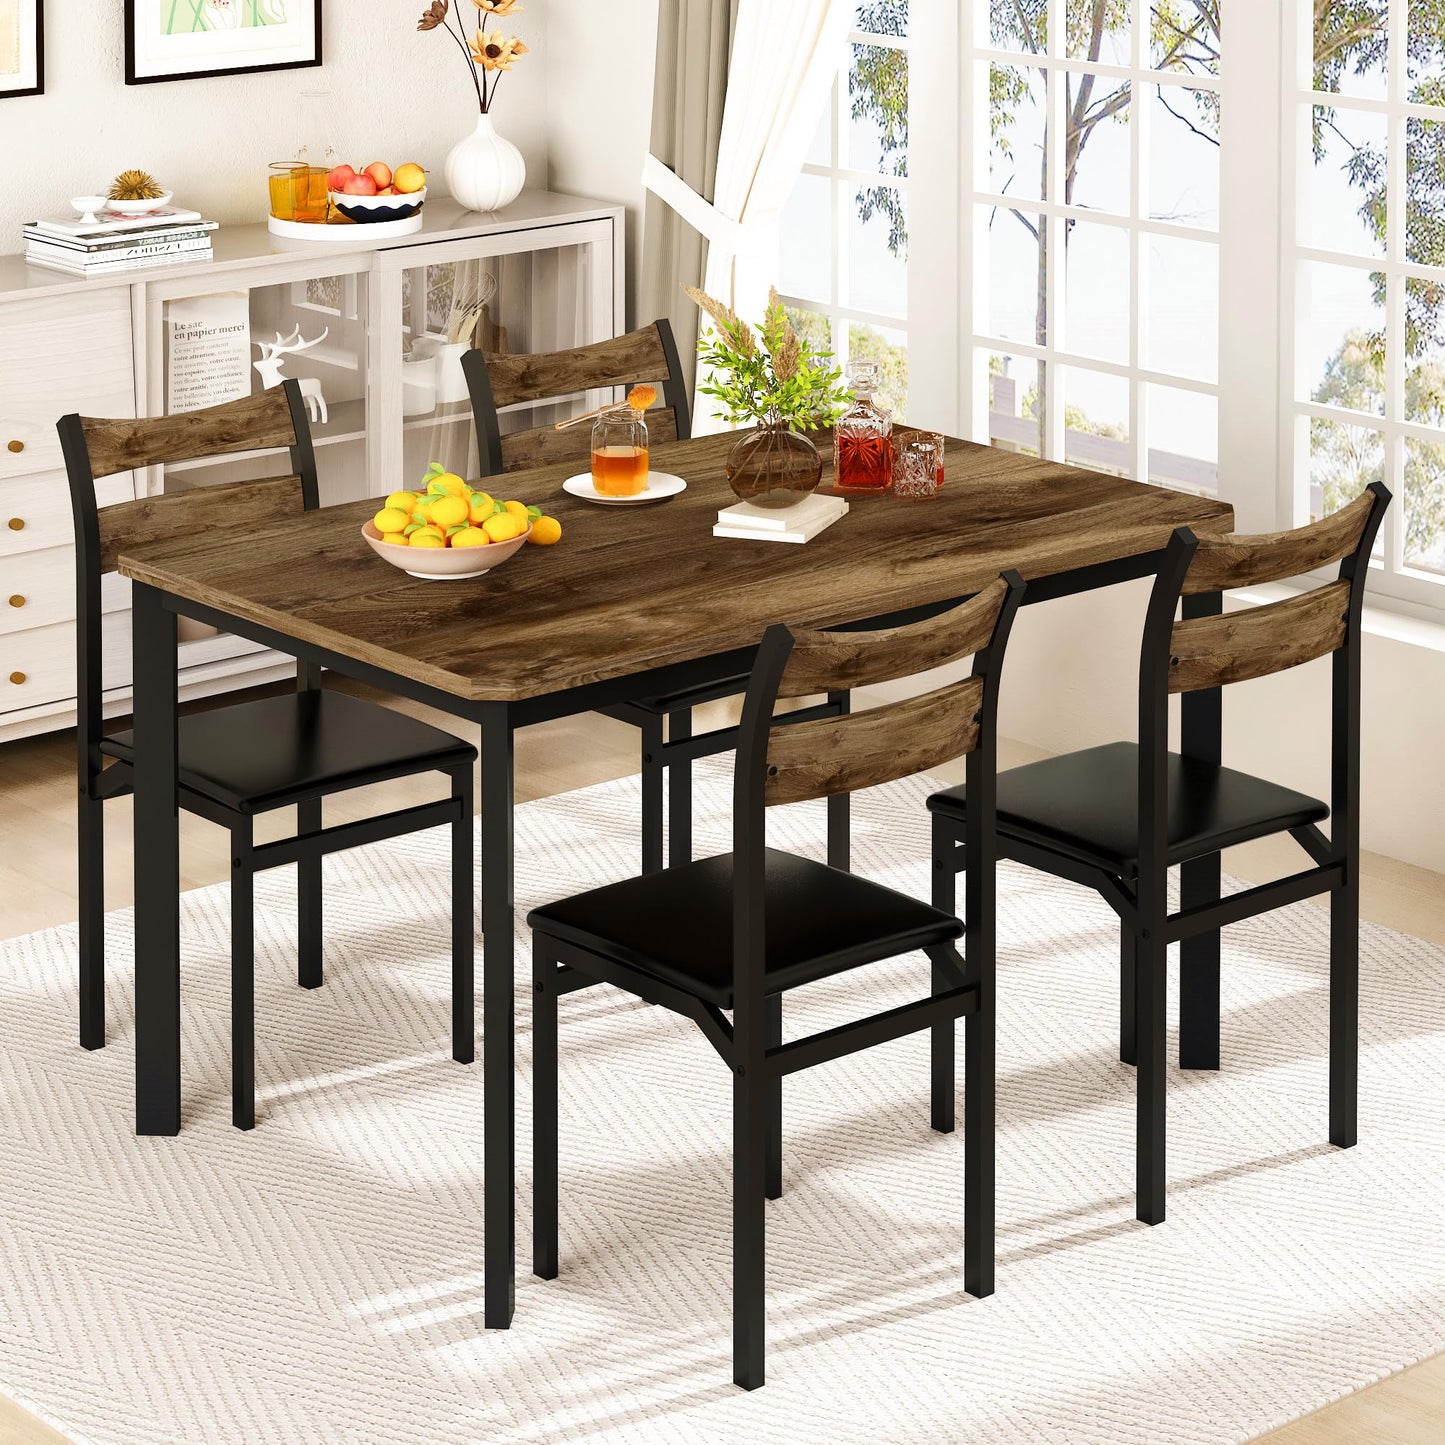 DKLGG Dining Table Set for 4, 43.3" Dining Room Table with 4 Upholstered PU Leather Chairs, Modern Wood Kitchen Table and Chairs Set, 5-Piece Dinette